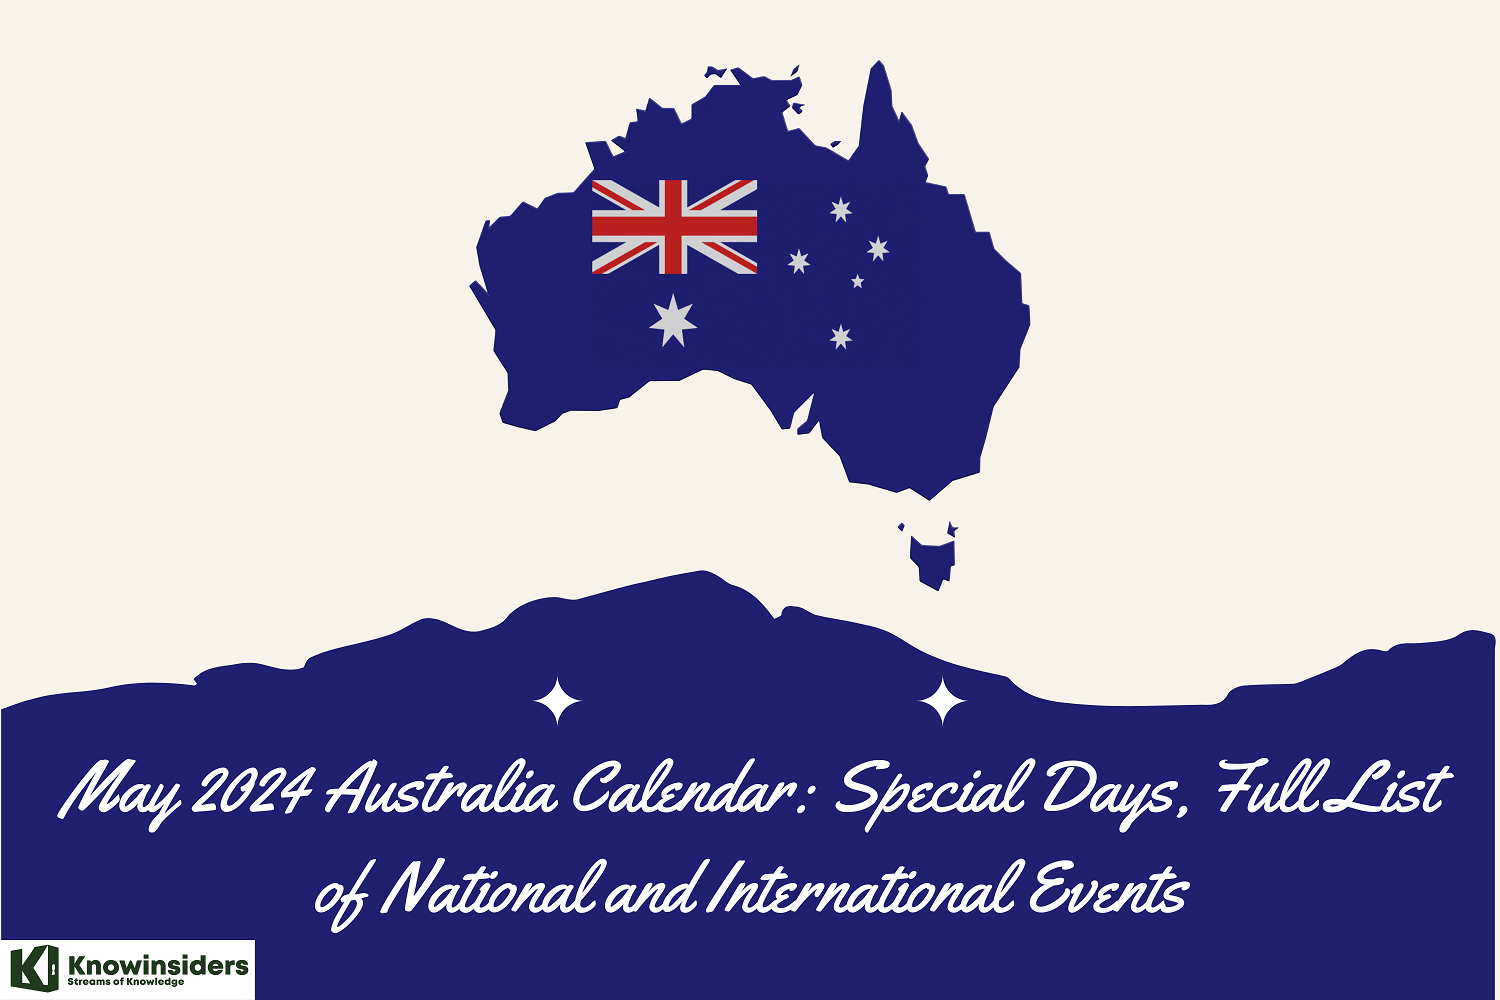 May 2024 Australia Calendar: Special Days, Full List of National Holidays and International Events